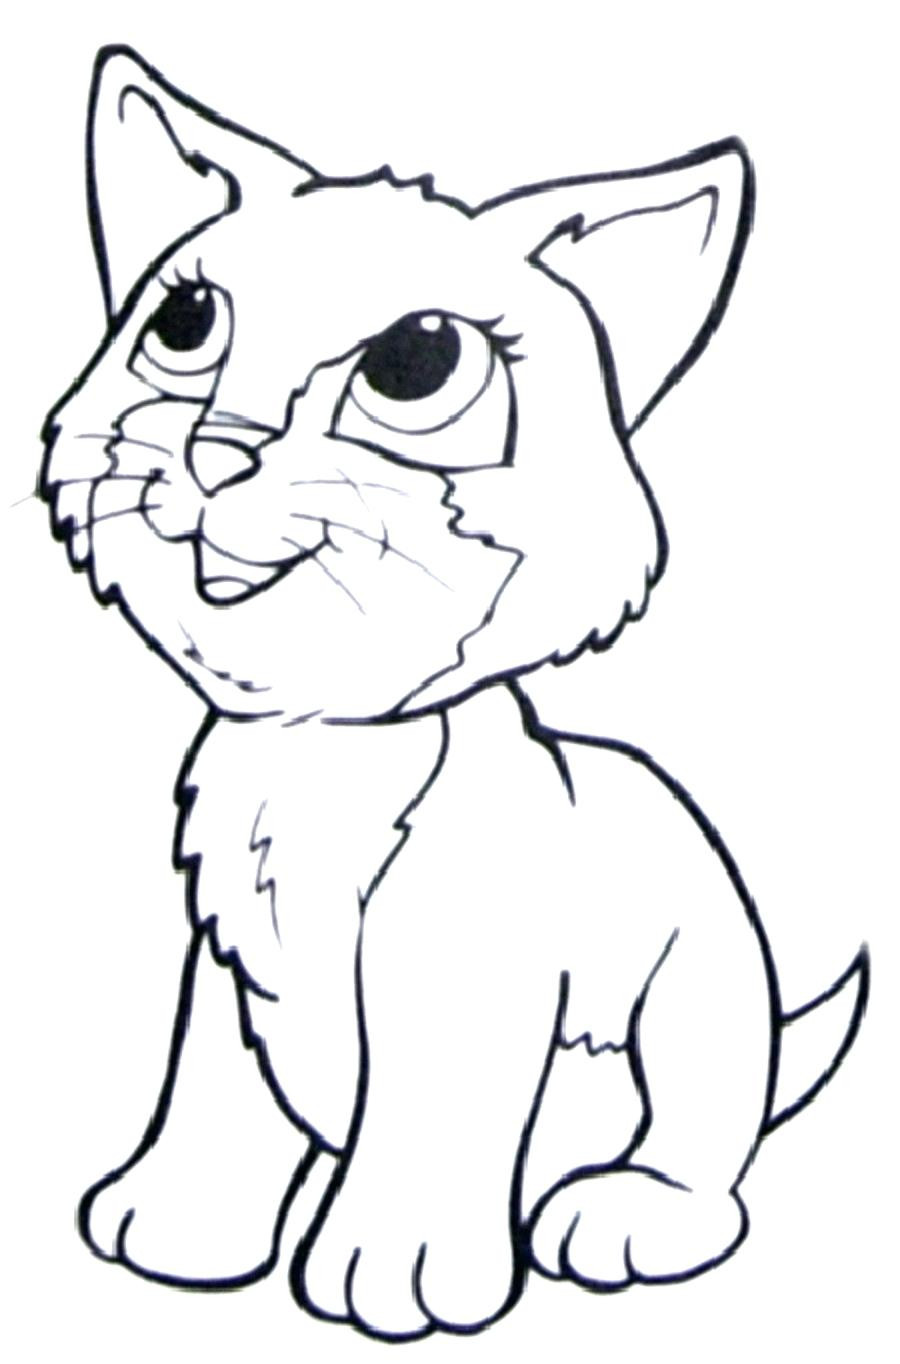 463 Animal Fat Cat Coloring Pages for Kids